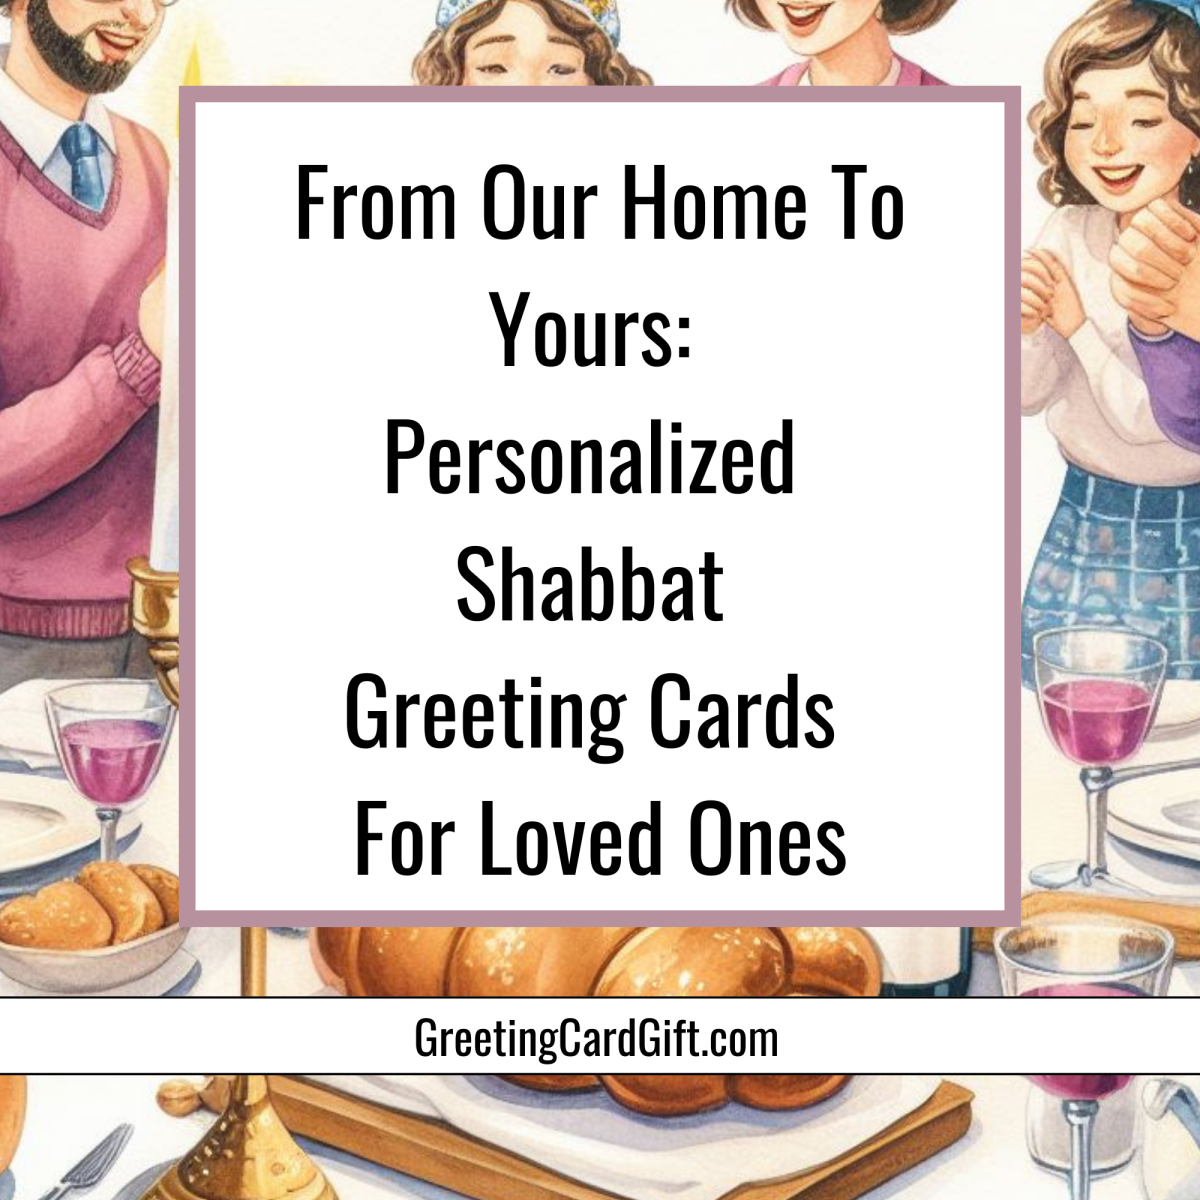 From Our Home To Yours: Personalized Shabbat Greeting Cards For Loved Ones